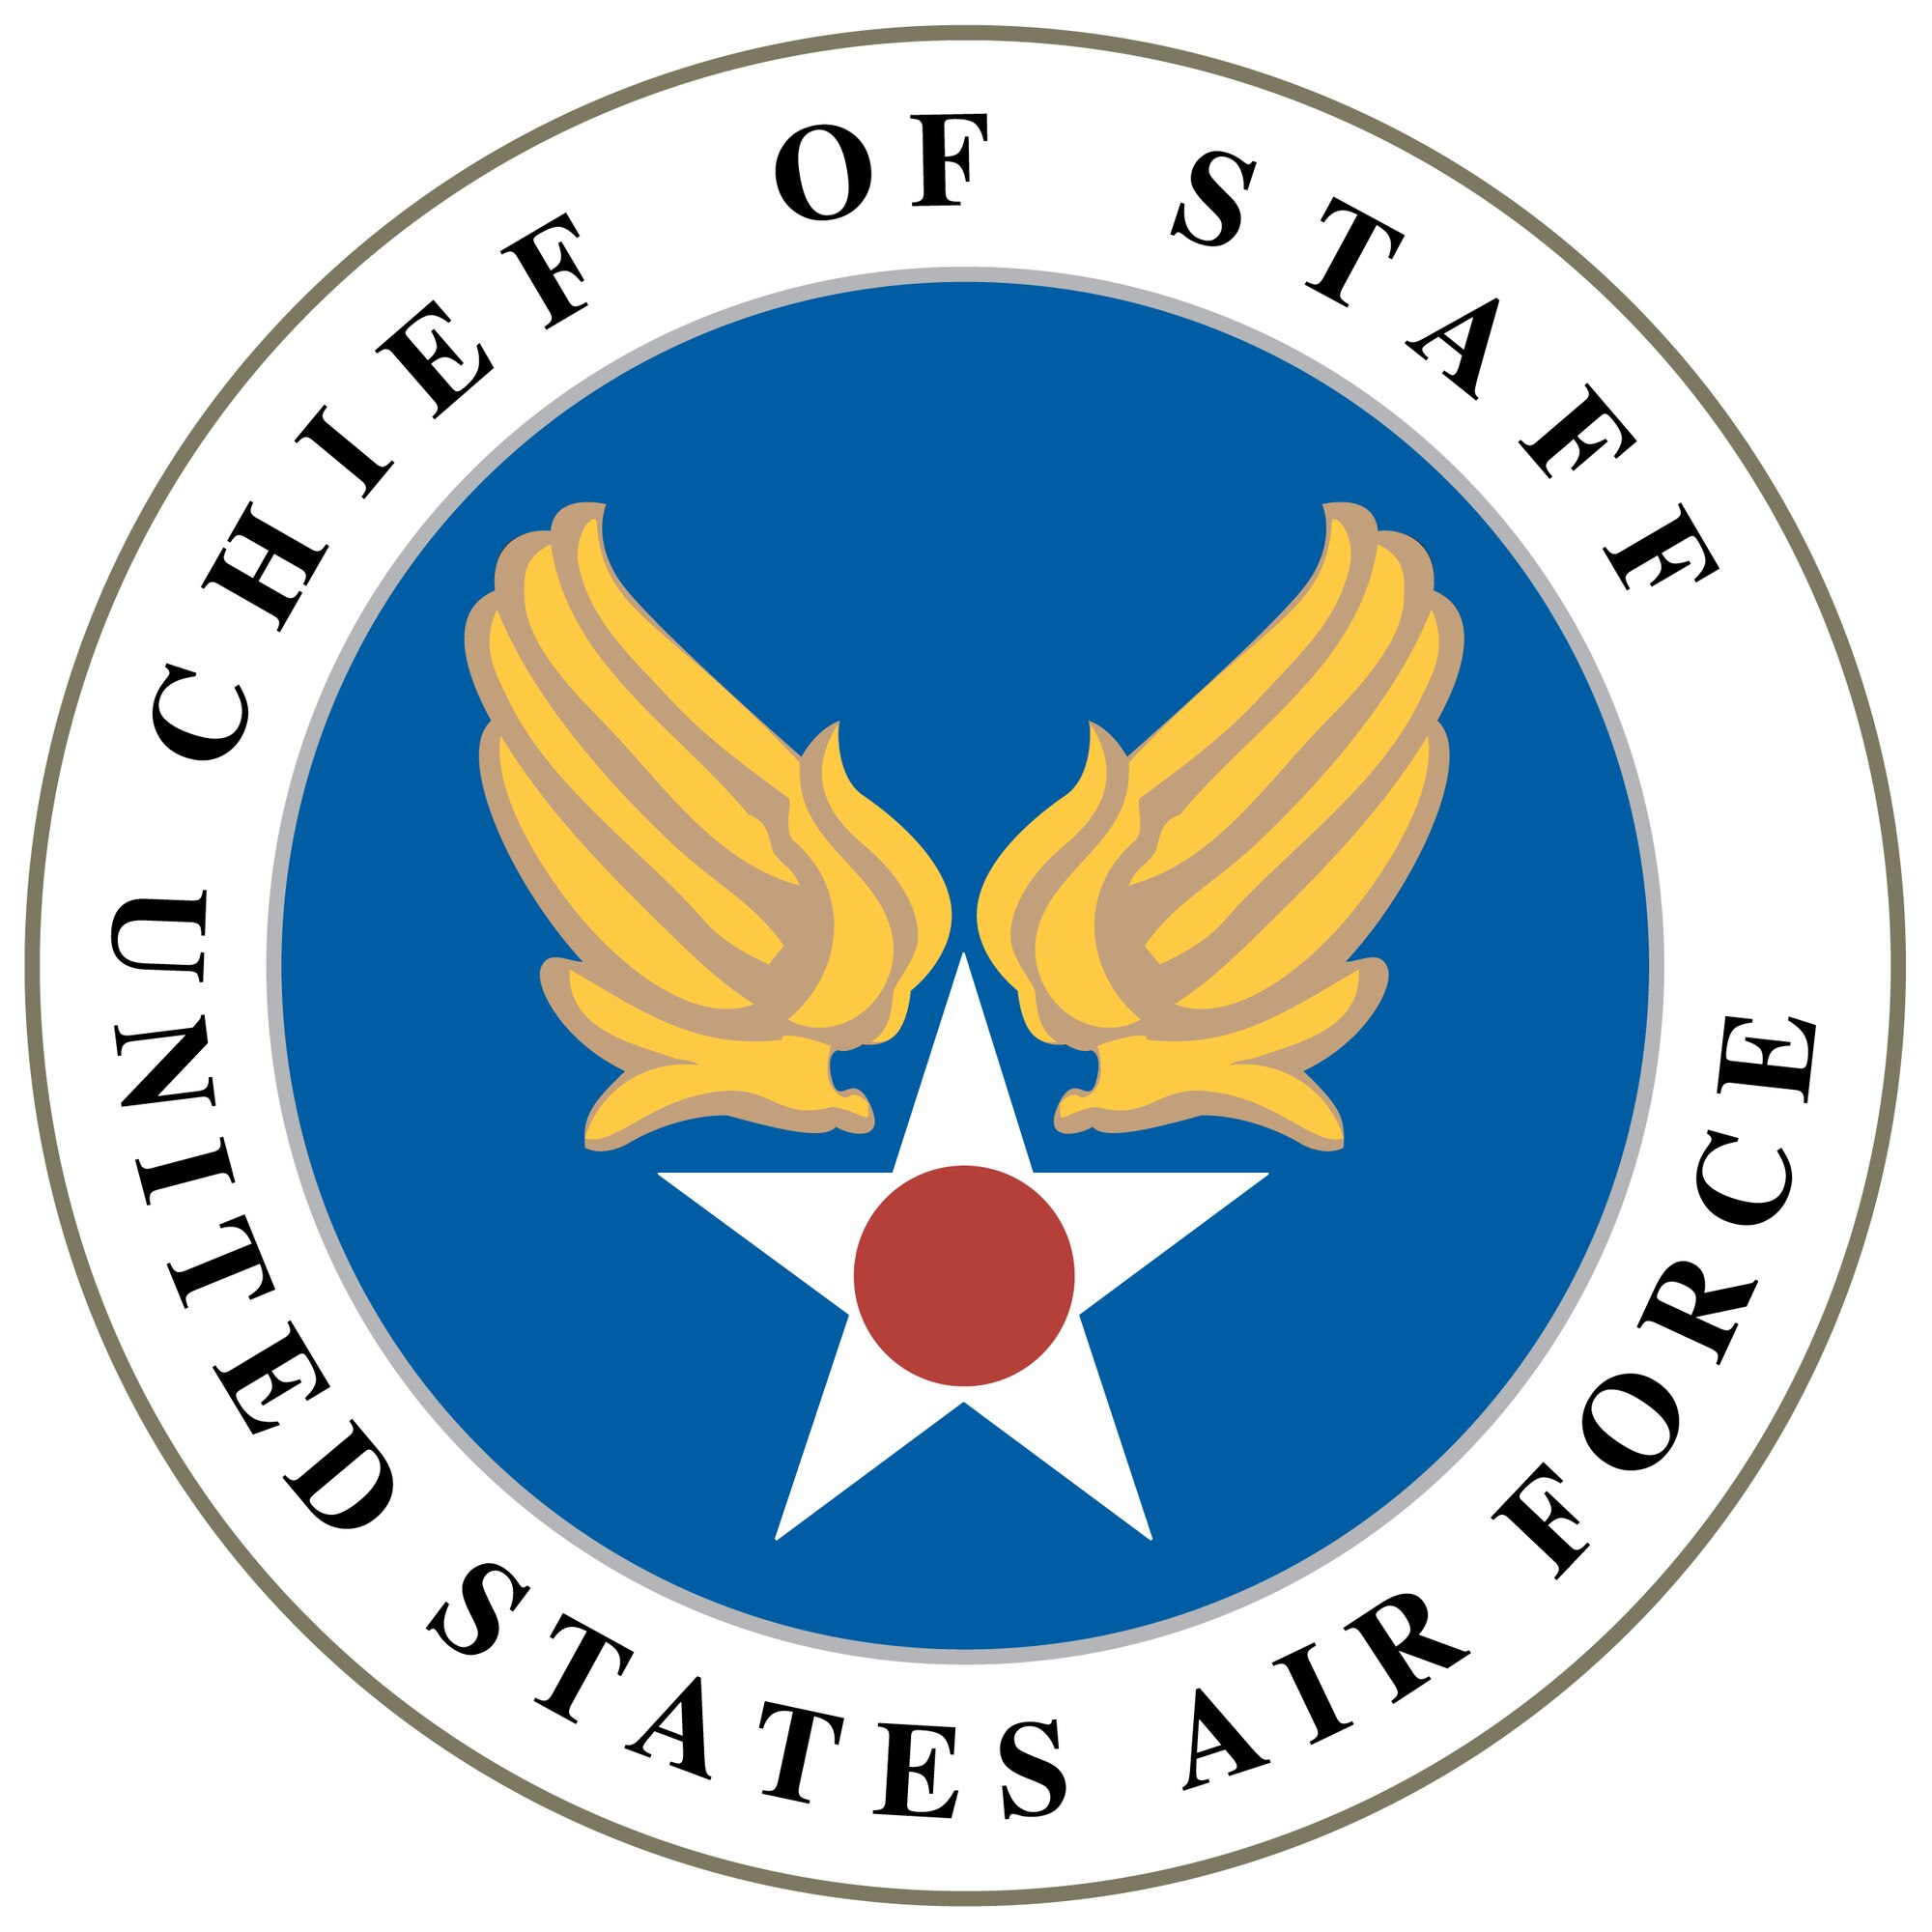 Air Force Chief of Staff Seal. Department of Defense and Military Seals are protected by law from unauthorized use. These seals may NOT be used for non-official purposes. For additional information contact the appropriate proponent.